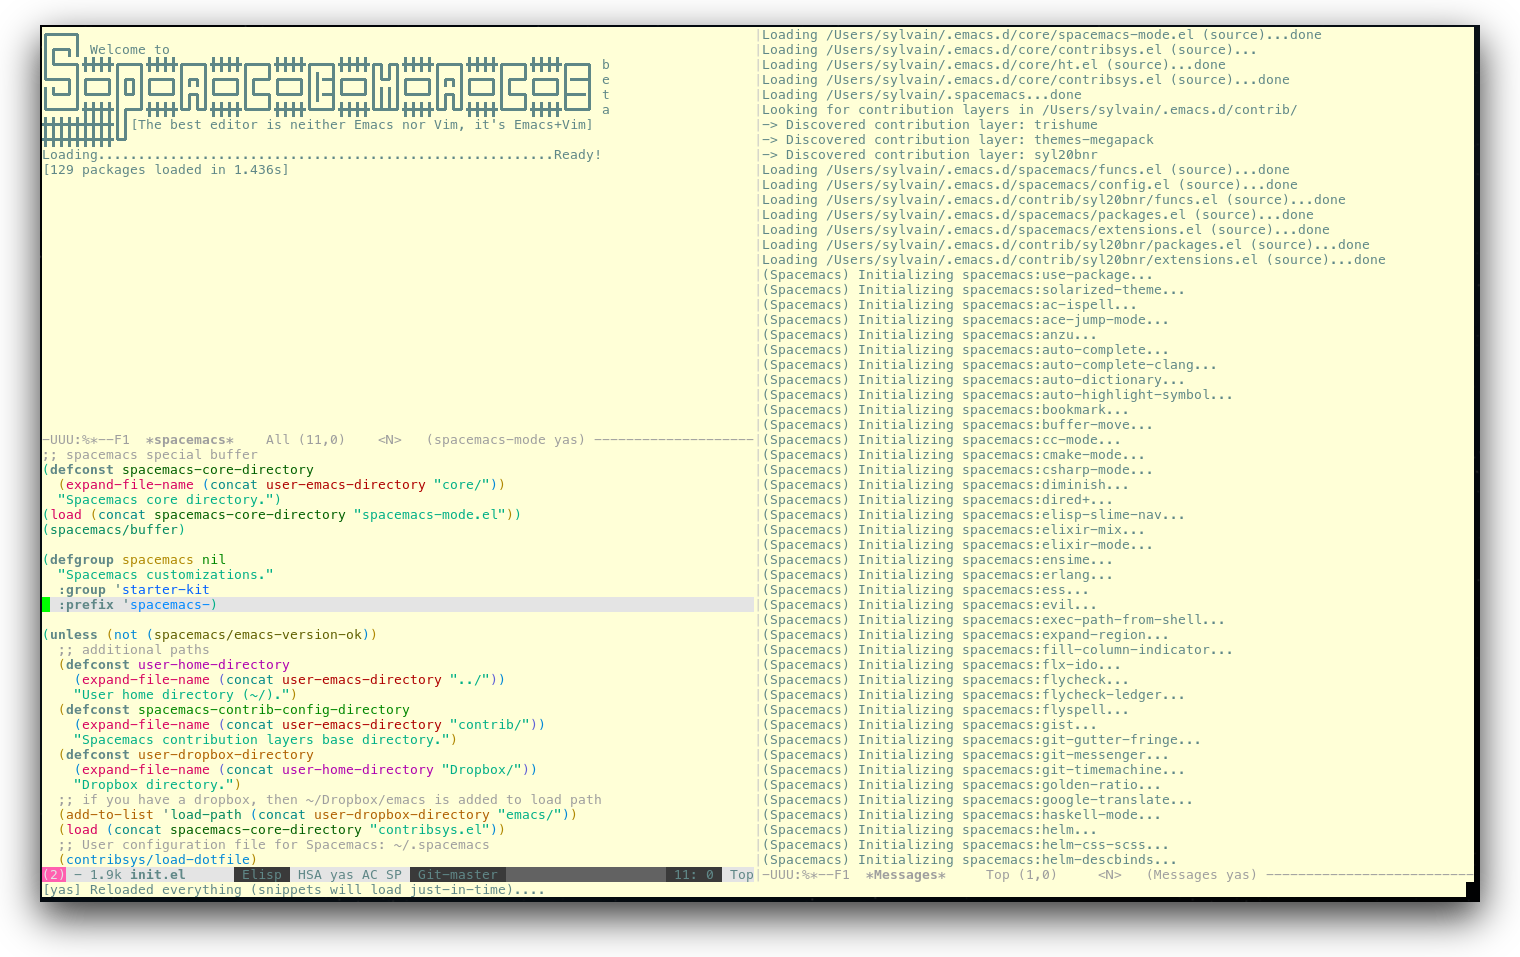 /TakeV/spacemacs/media/commit/7c160e8ae5f298a730f0b7c9730be06d55a6dec2/doc/img/spacemacs-urxvt.png